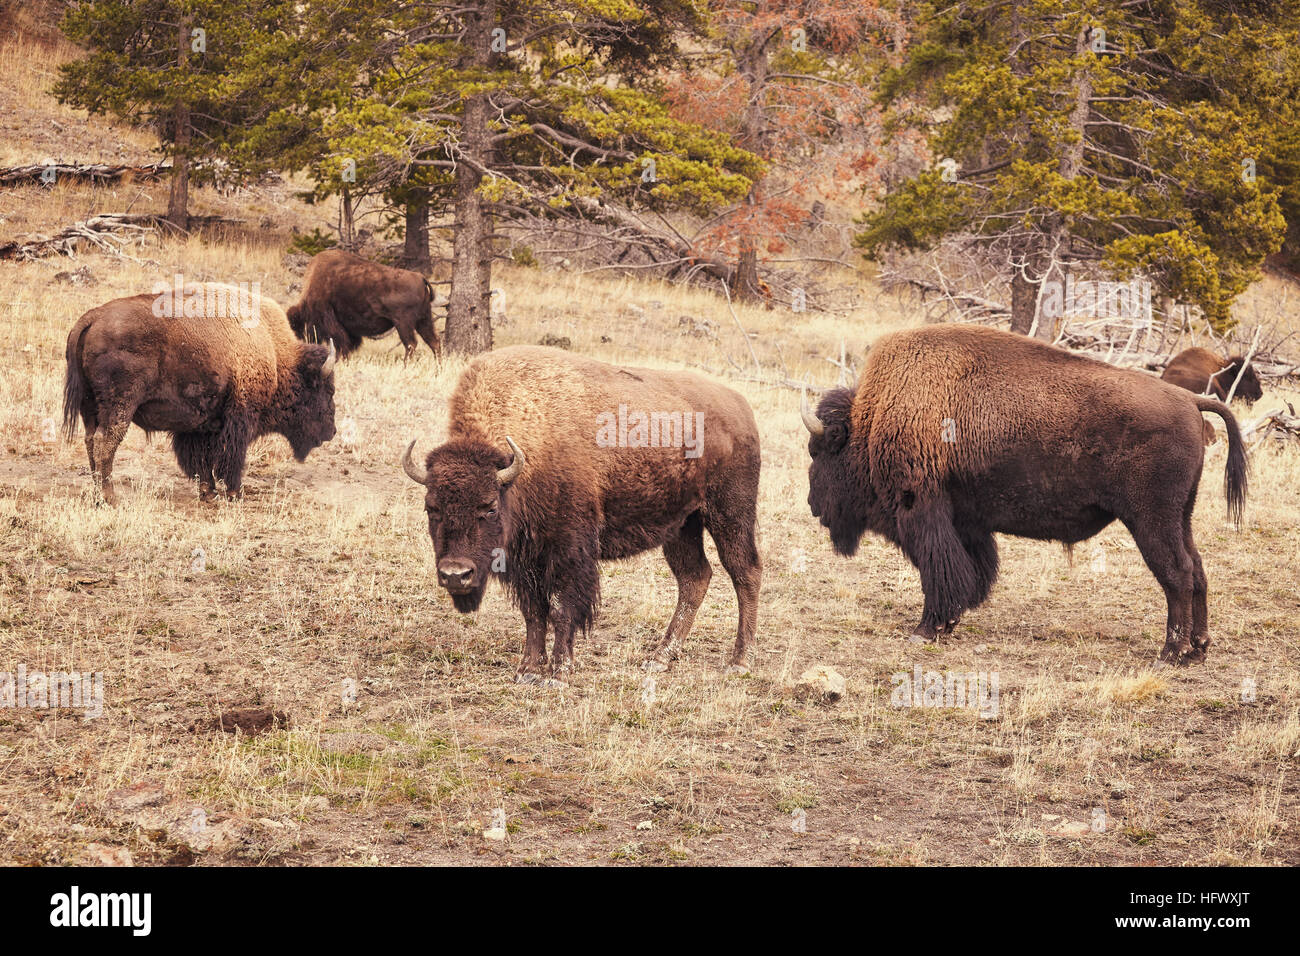 Retro toned American bison (Bison bison) grazing in Yellowstone National Park, Wyoming, USA. Stock Photo